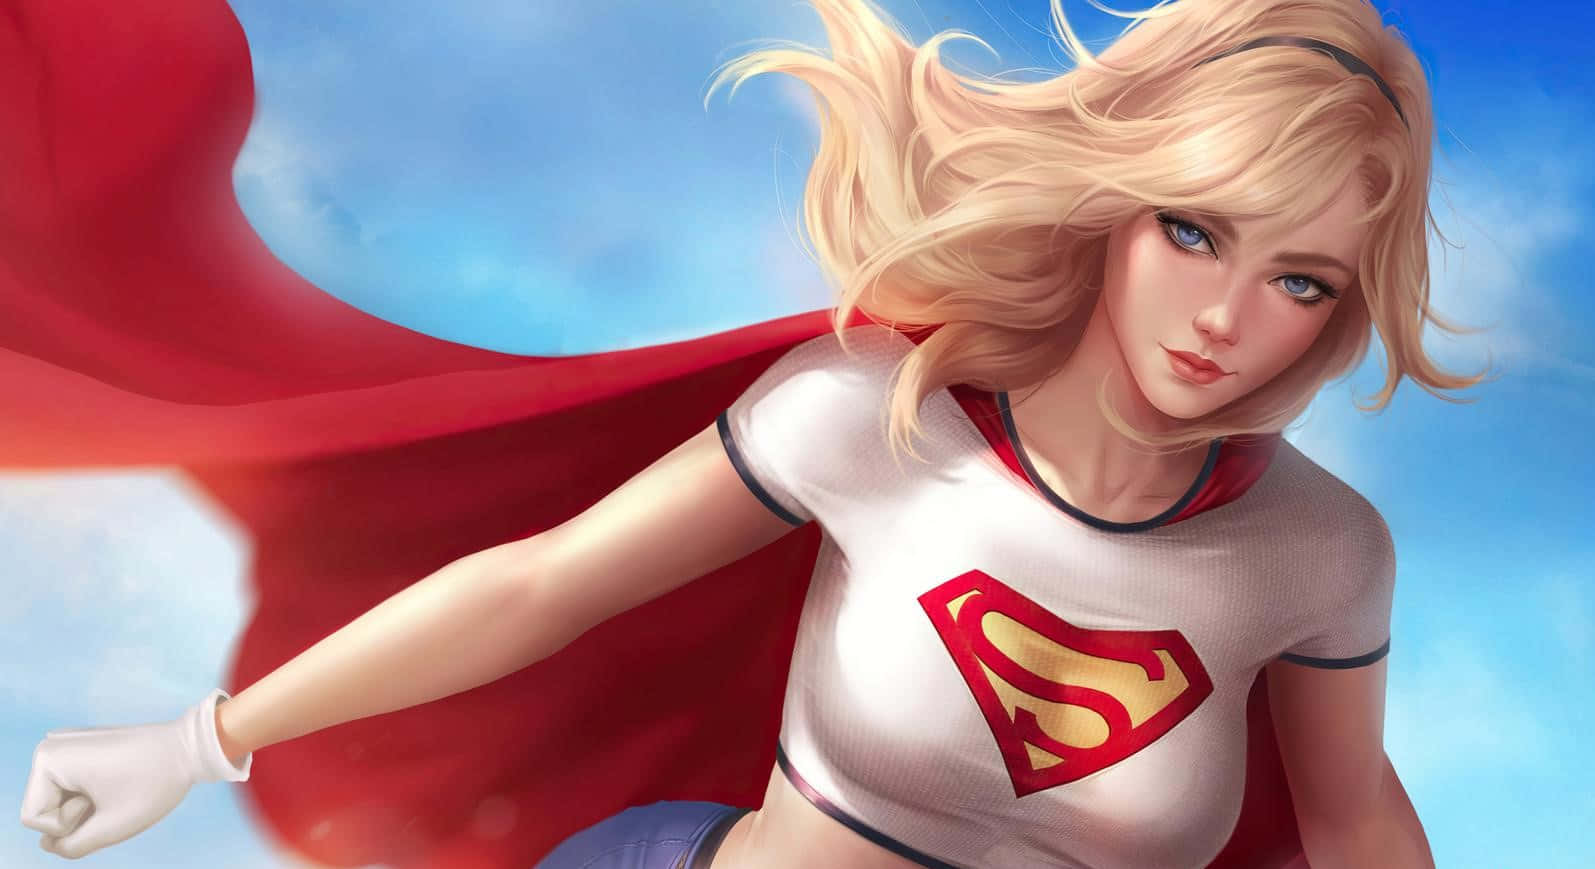 Supergirl - A Girl In A Cape Flying Through The Air